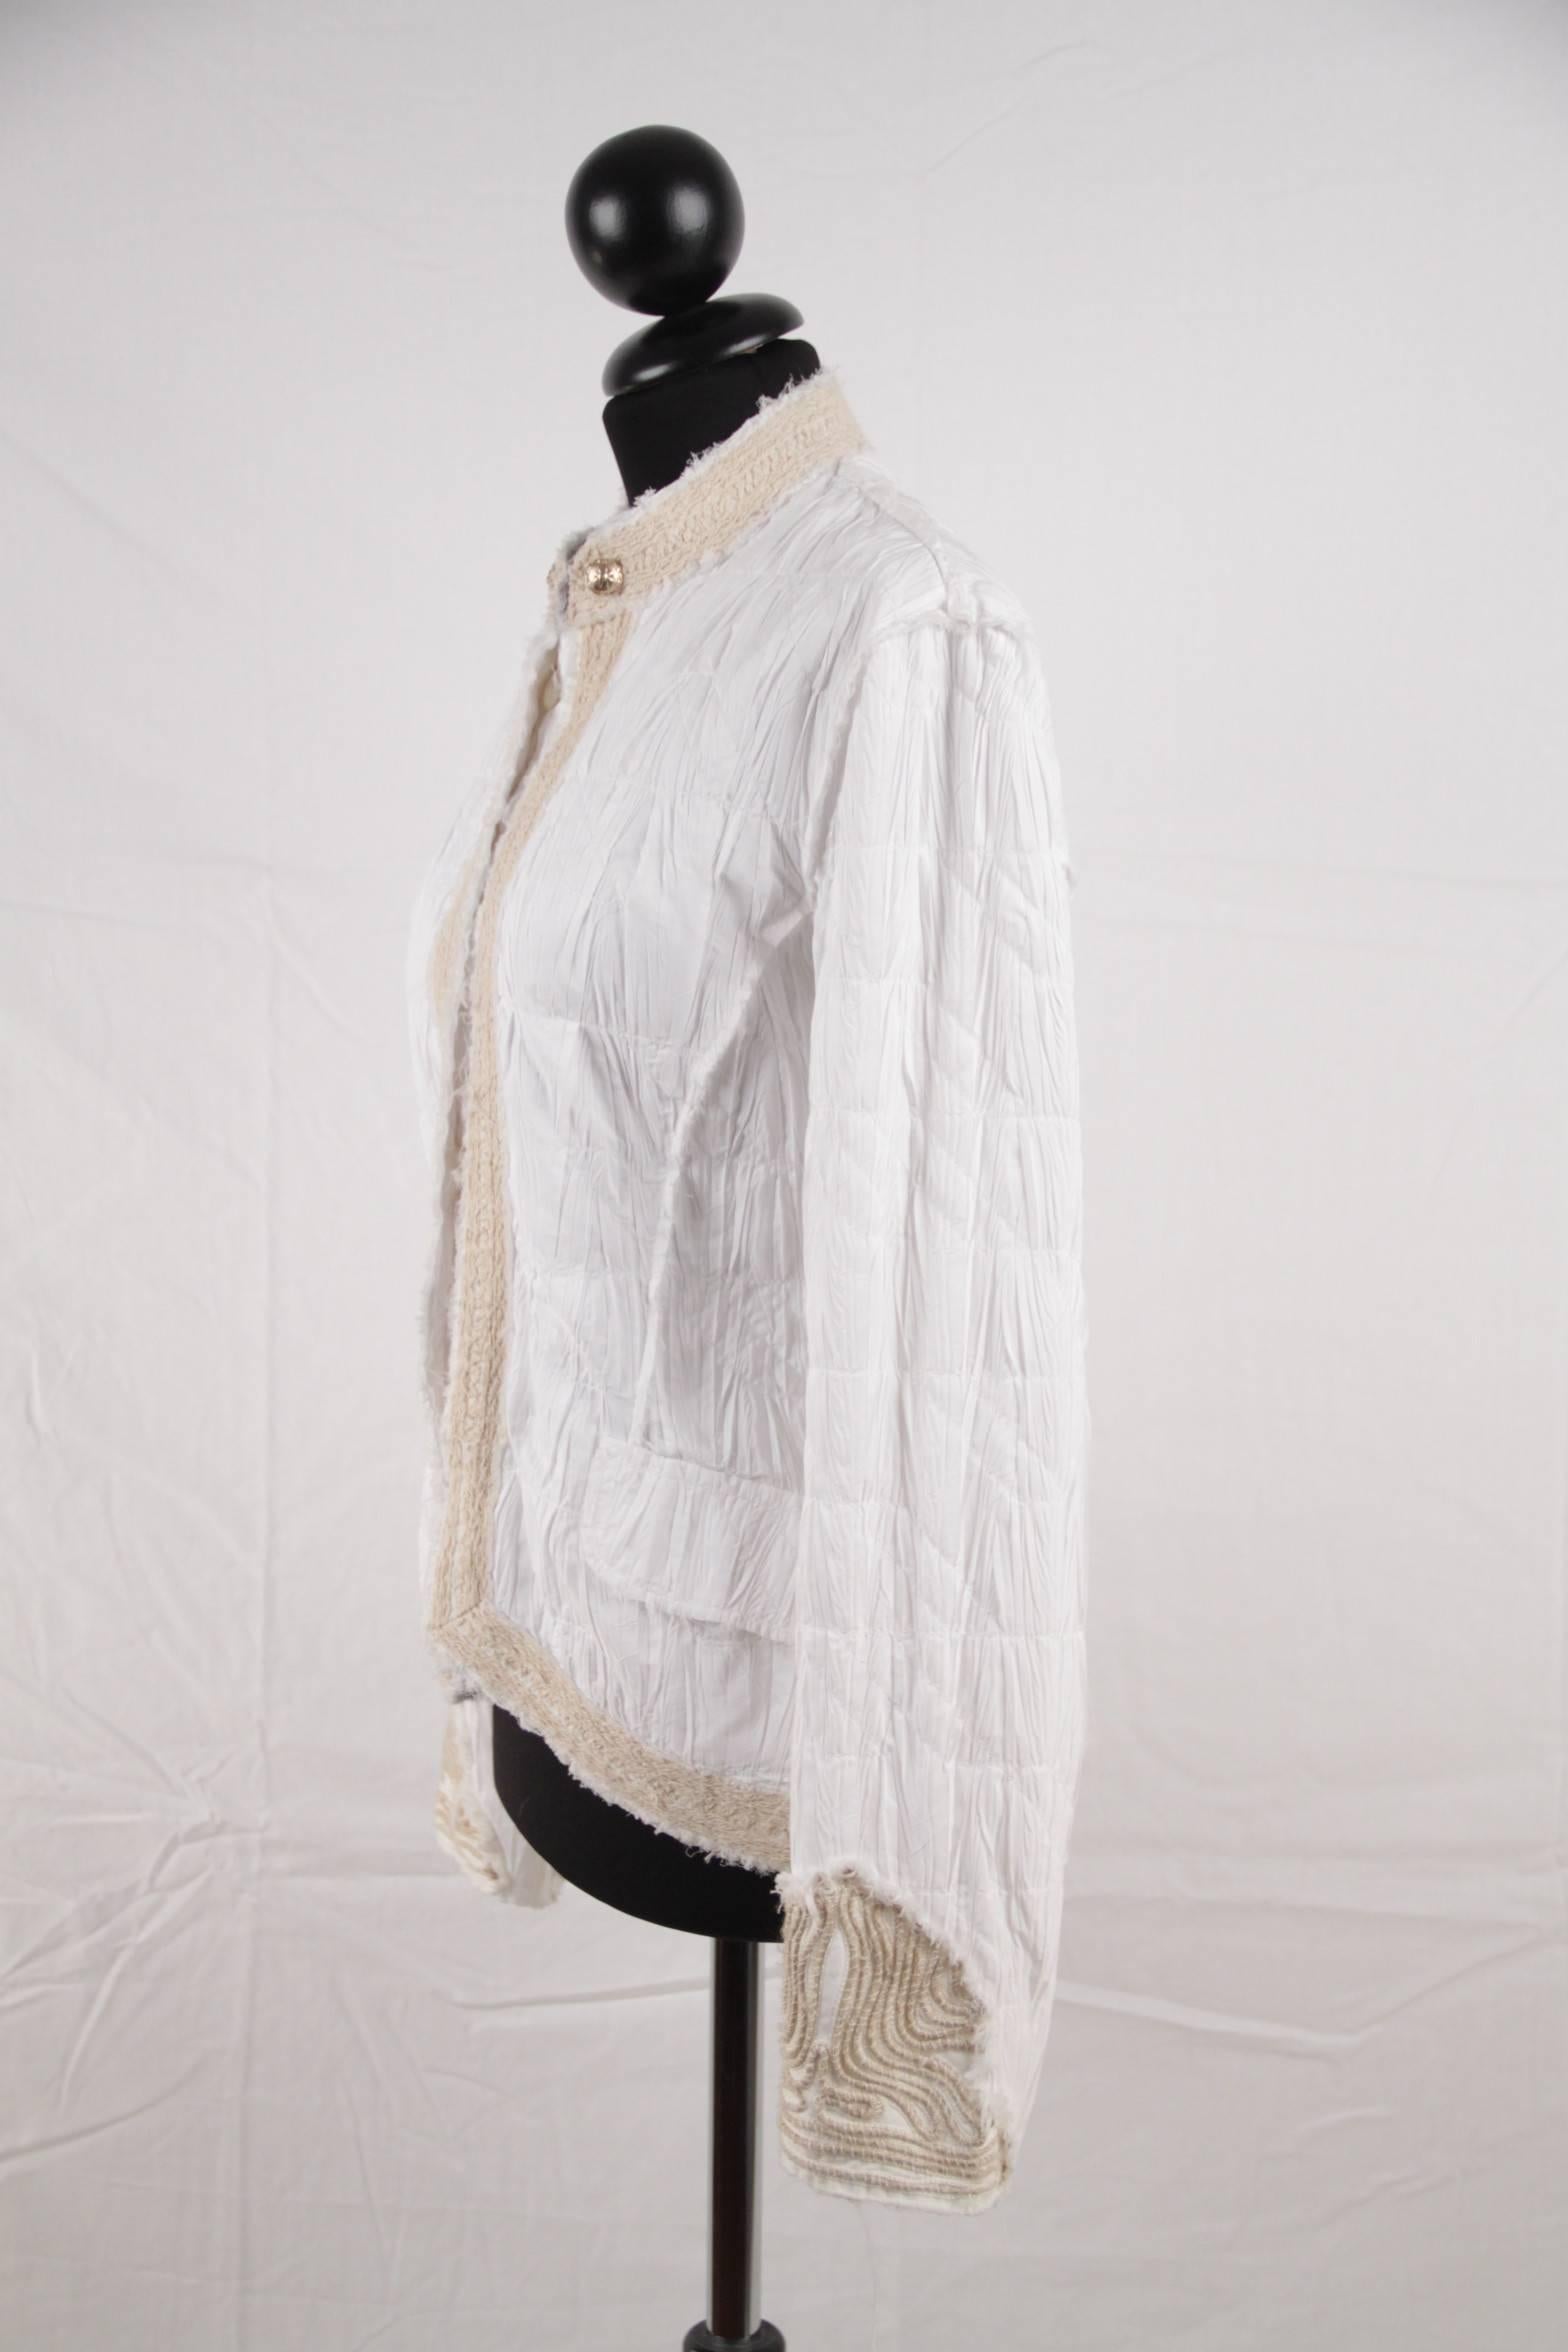 Women's ERMANNO DAELLI White Crinckled COLLARLESS JACKET w/ Embroidery SIZE 44